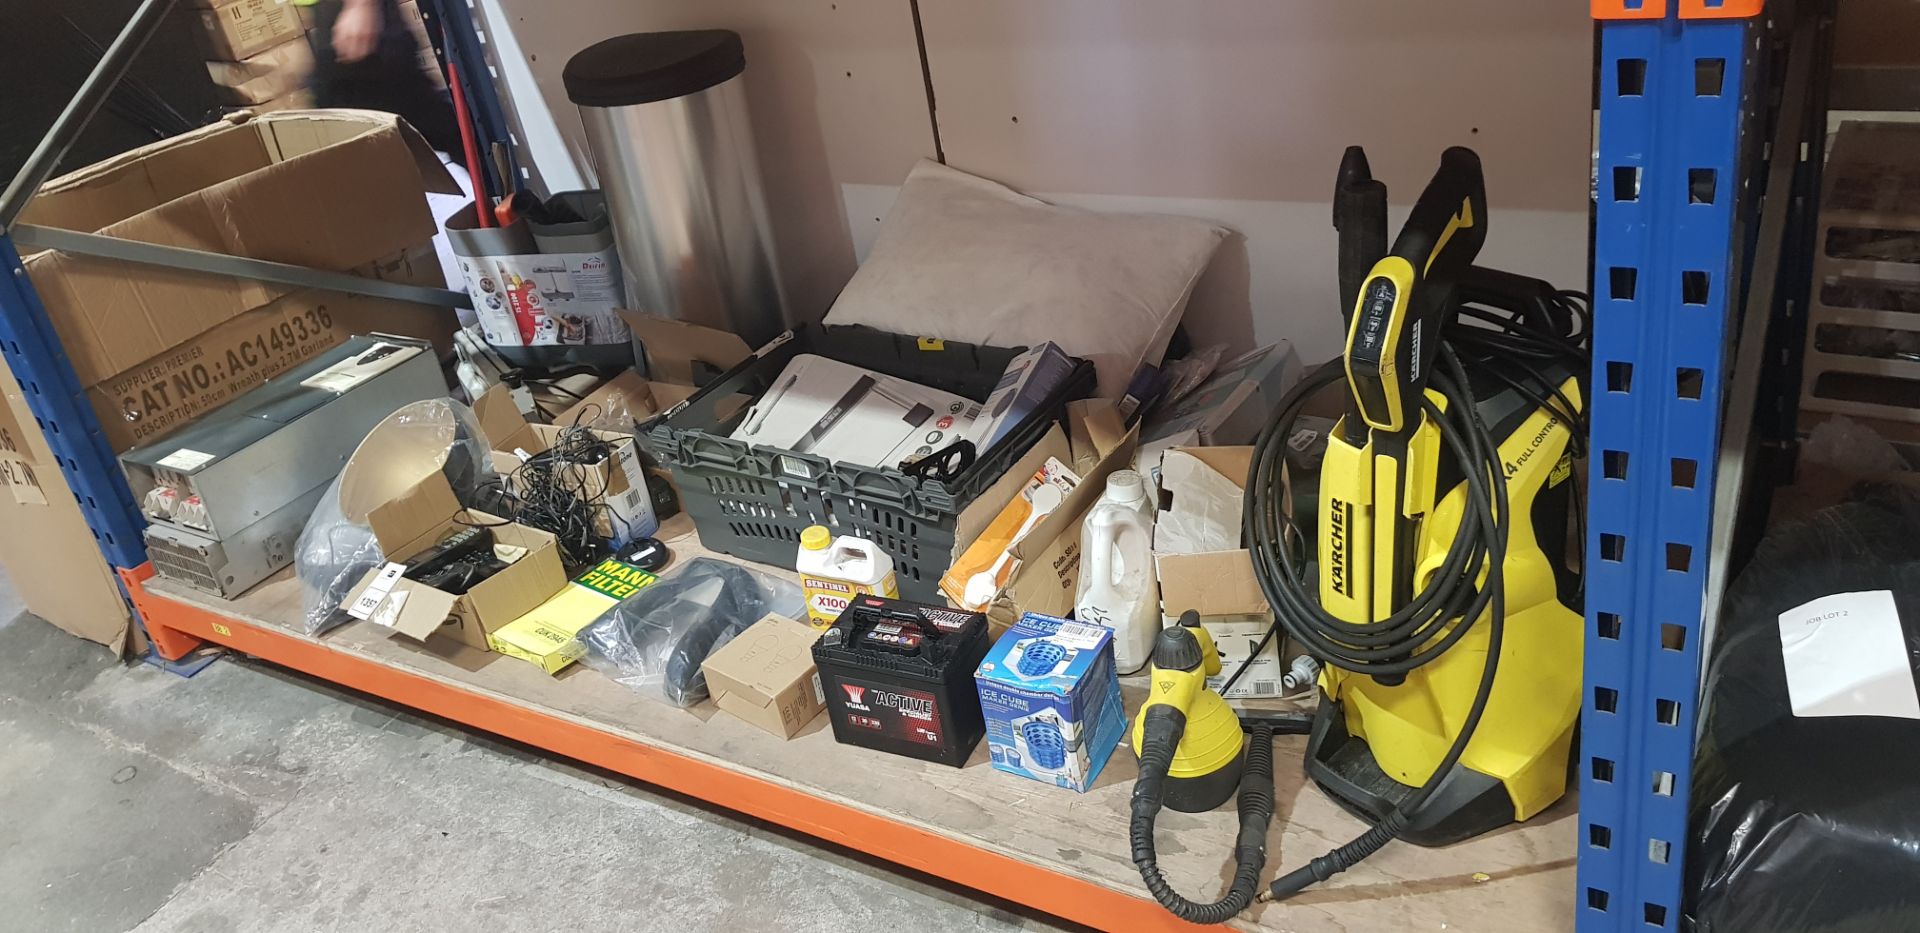 20 PIECE MIXED LOT CONTAINING 1 X KARCHER K4 FULL CONTROL POWER WASHER / QUEST HAND HELD STEAM